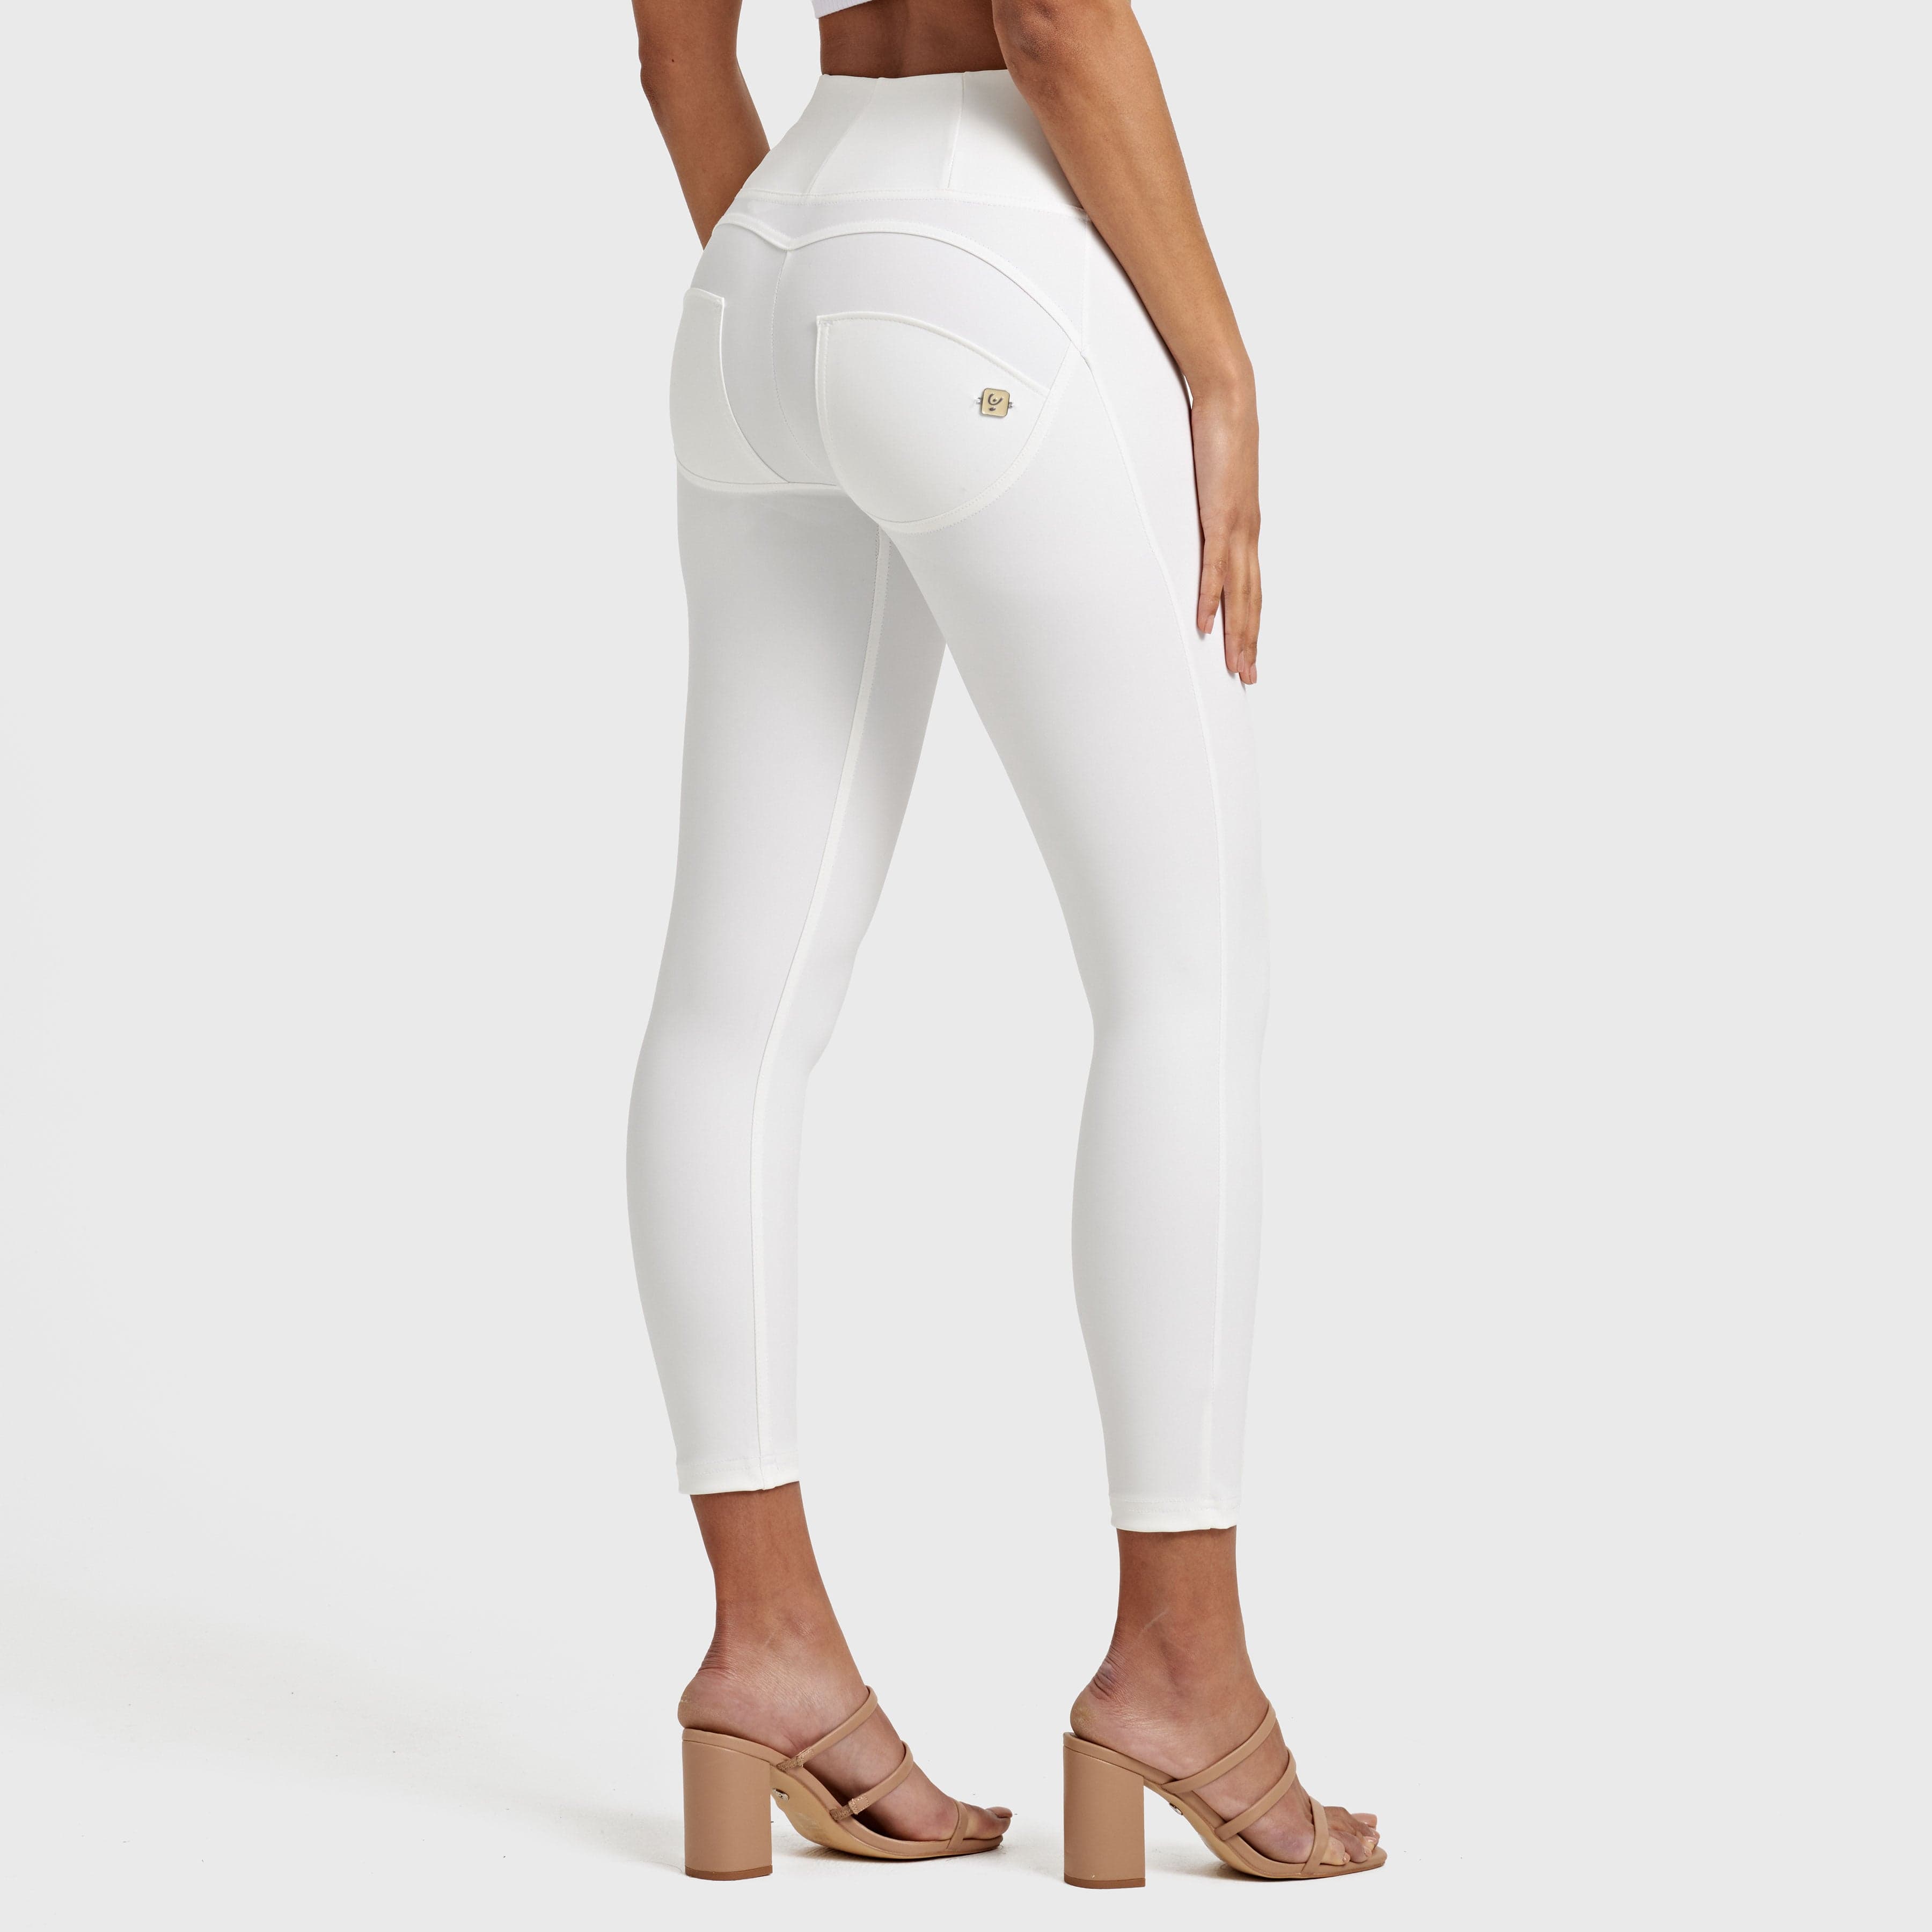 WR.UP® Faux Leather - High Waisted - 7/8 Length - White 1